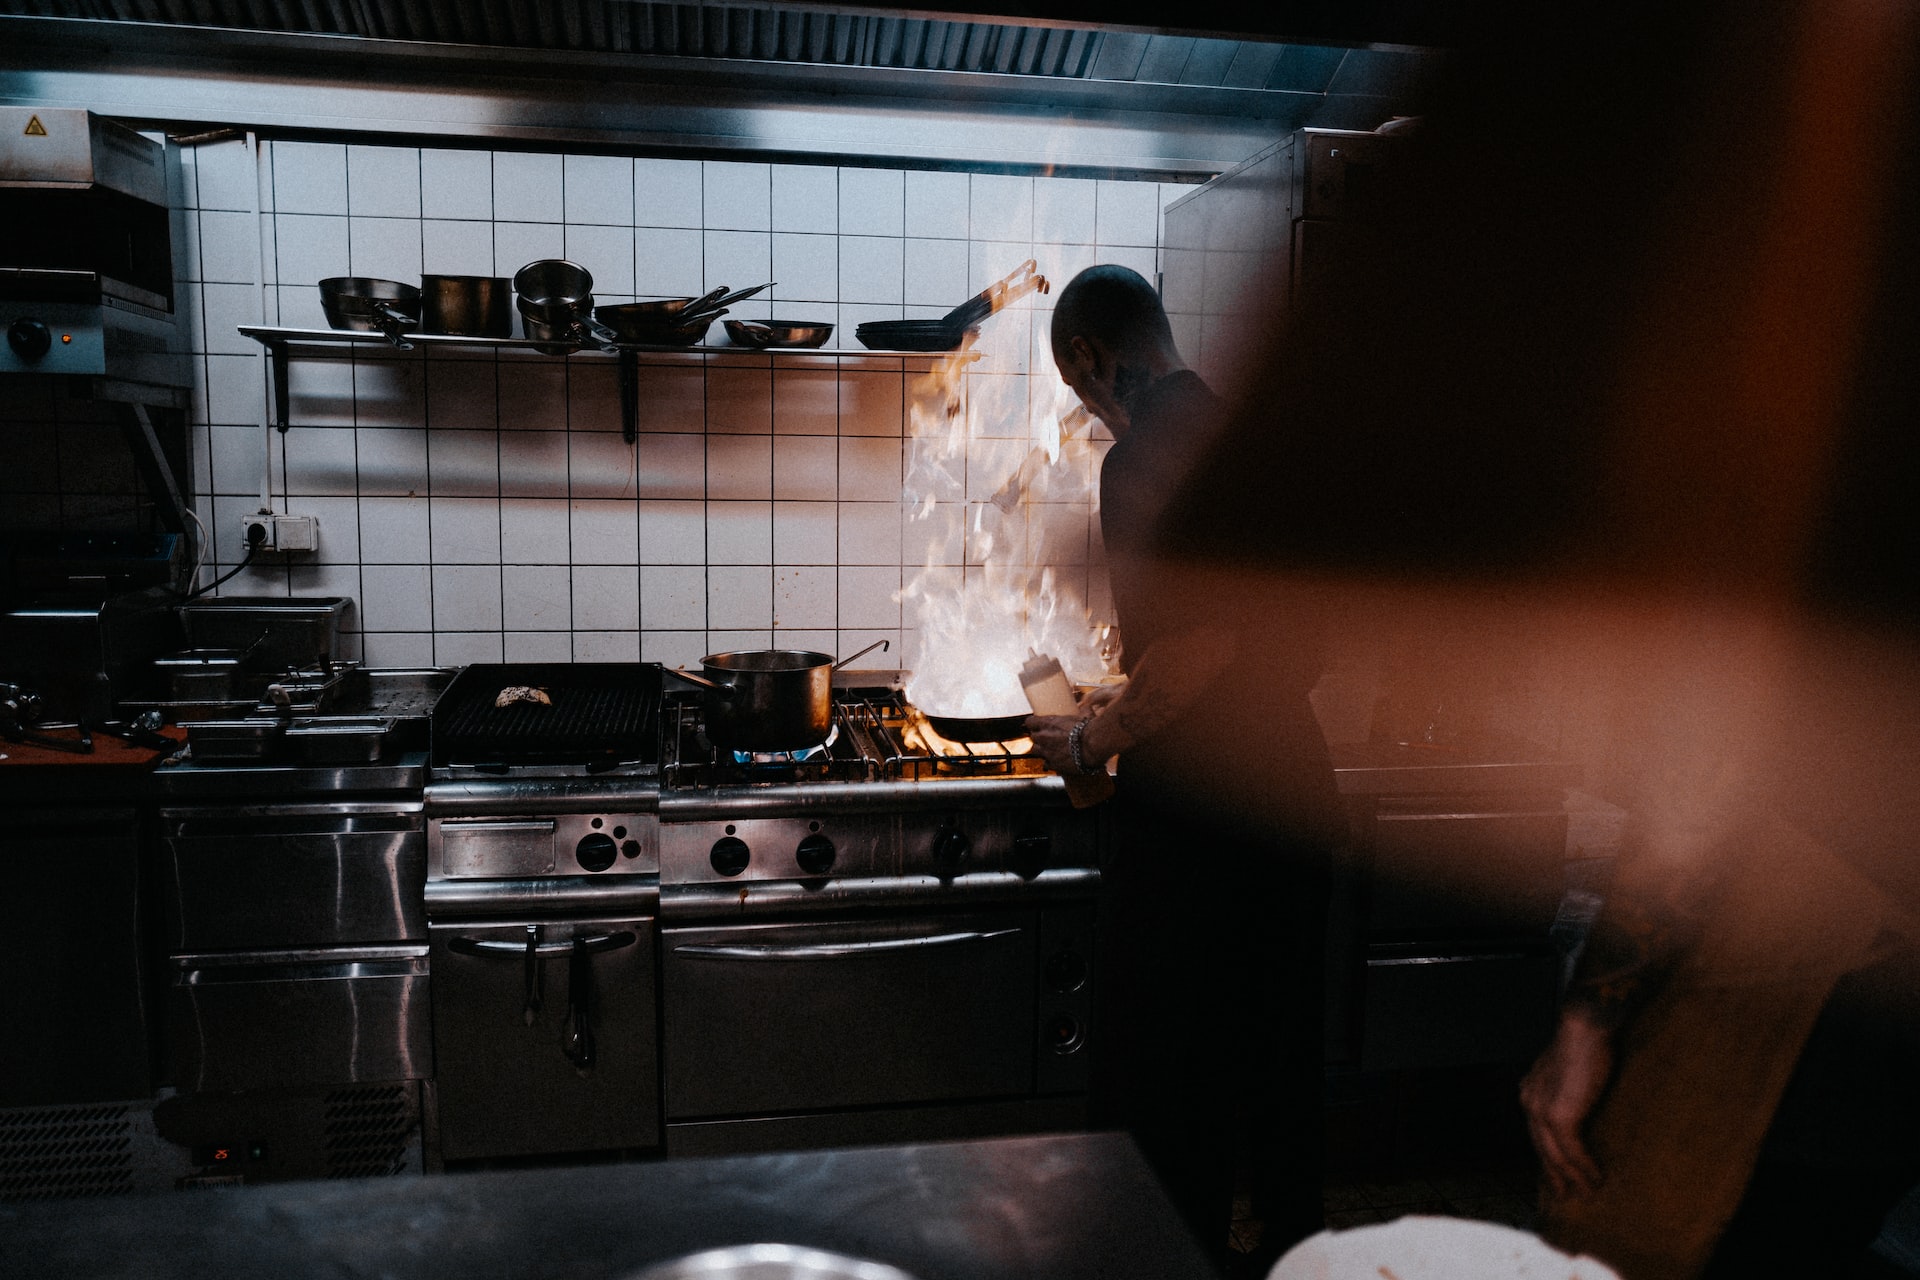 Person cooking in an industrial kitchen